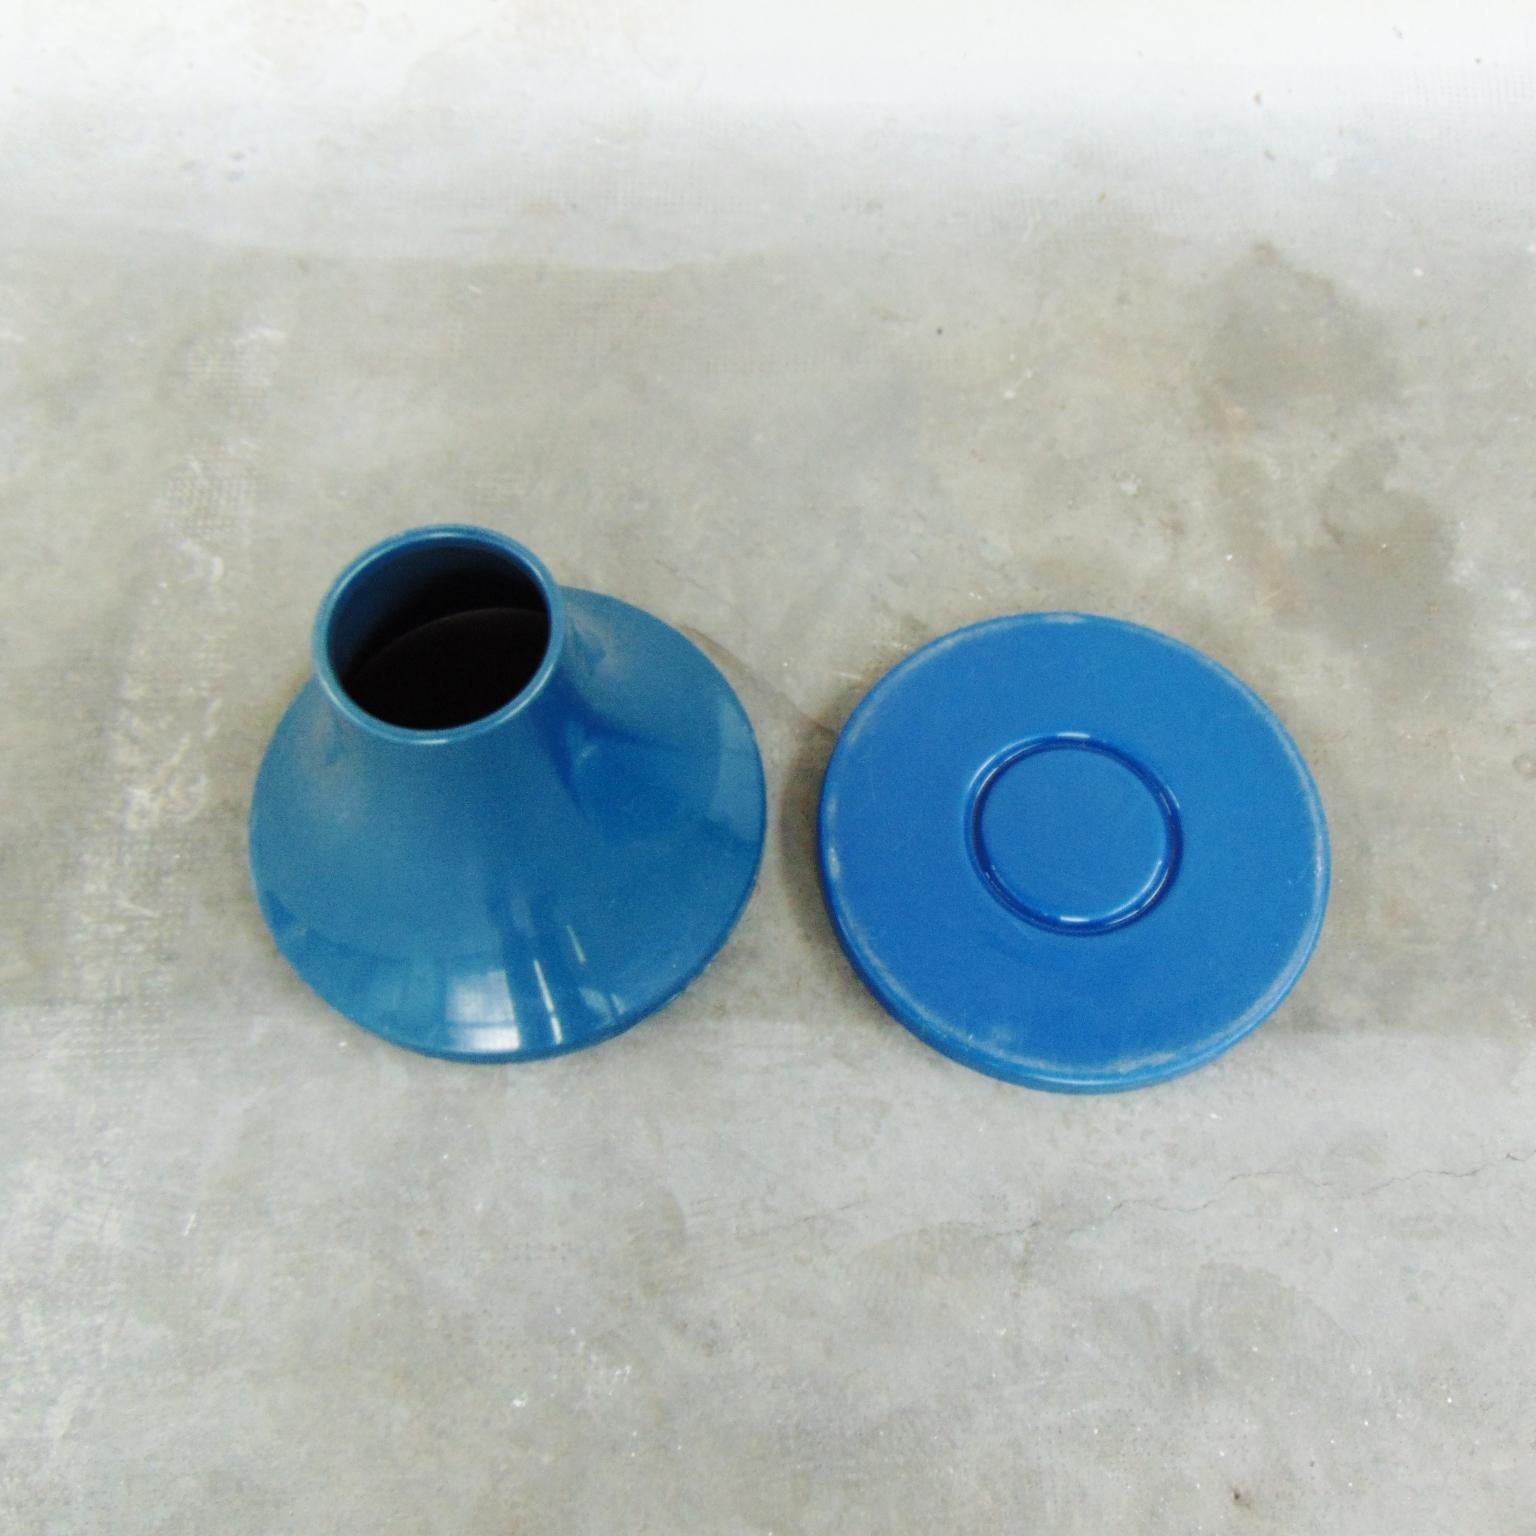 1972 Umbrella Stand in Blue Thermoformed Plastic by R. Lera for Sormani, Italy For Sale 2